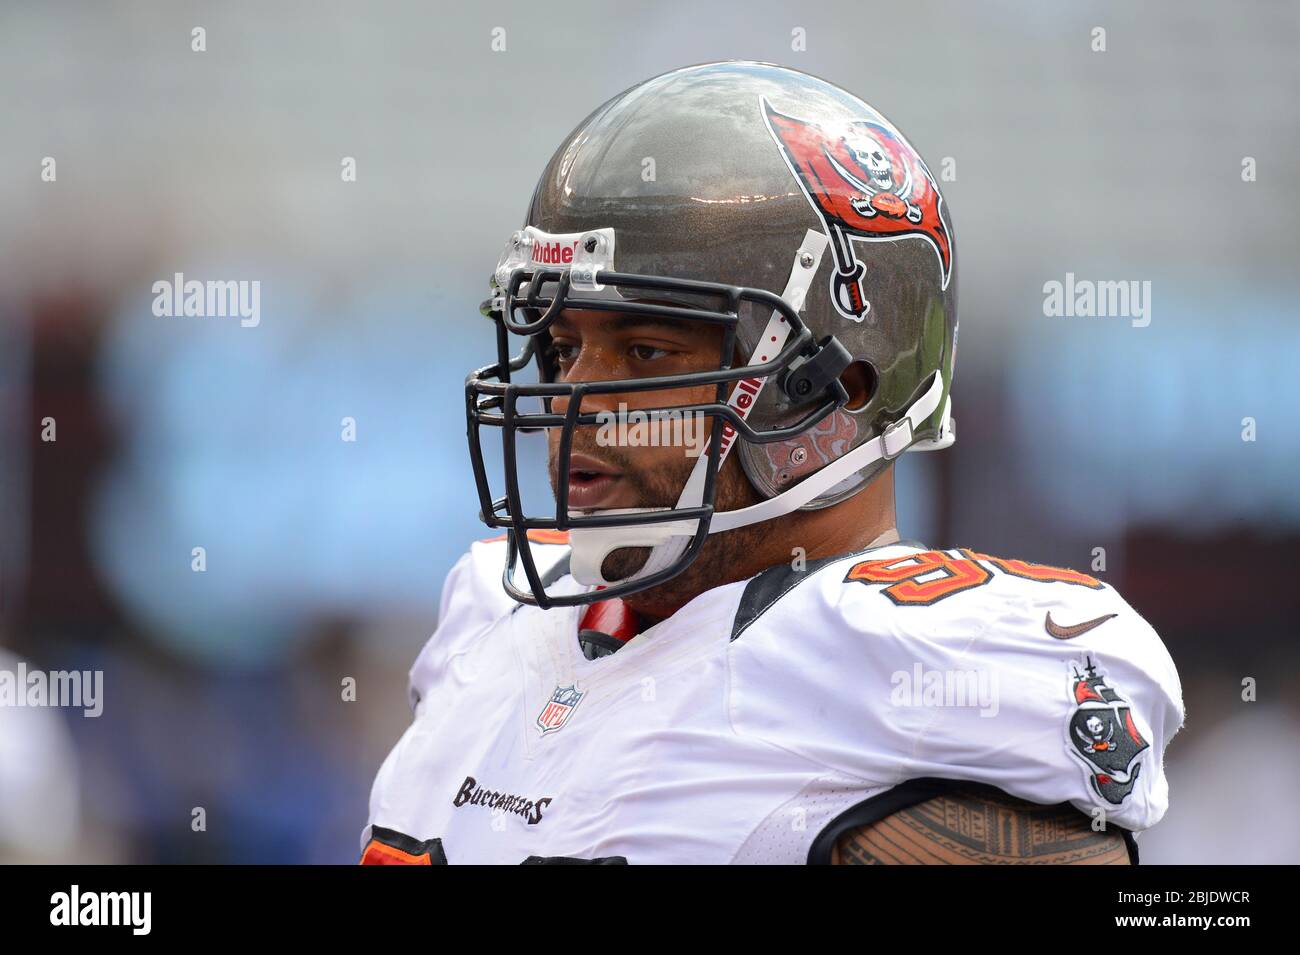 16 September 2012: Tampa Bay Buccaneers defensive tackle Roy Miller (90) during a week 2 NFL NFC matchup between the Tampa Bay Buccaneers and New York Stock Photo